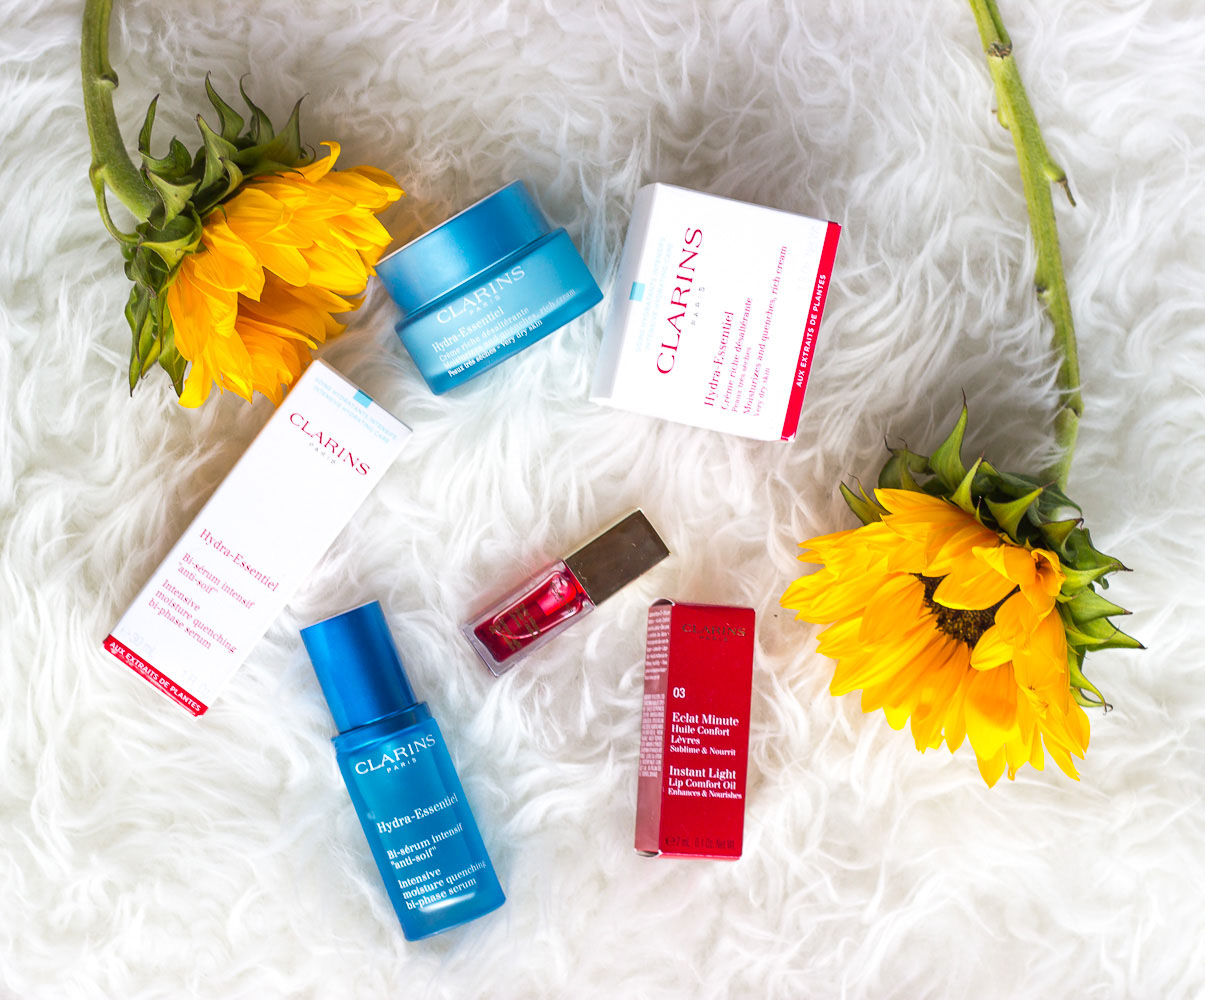 Clarins Hydra Essentials Collection Reviewed on Belle Meets World blog